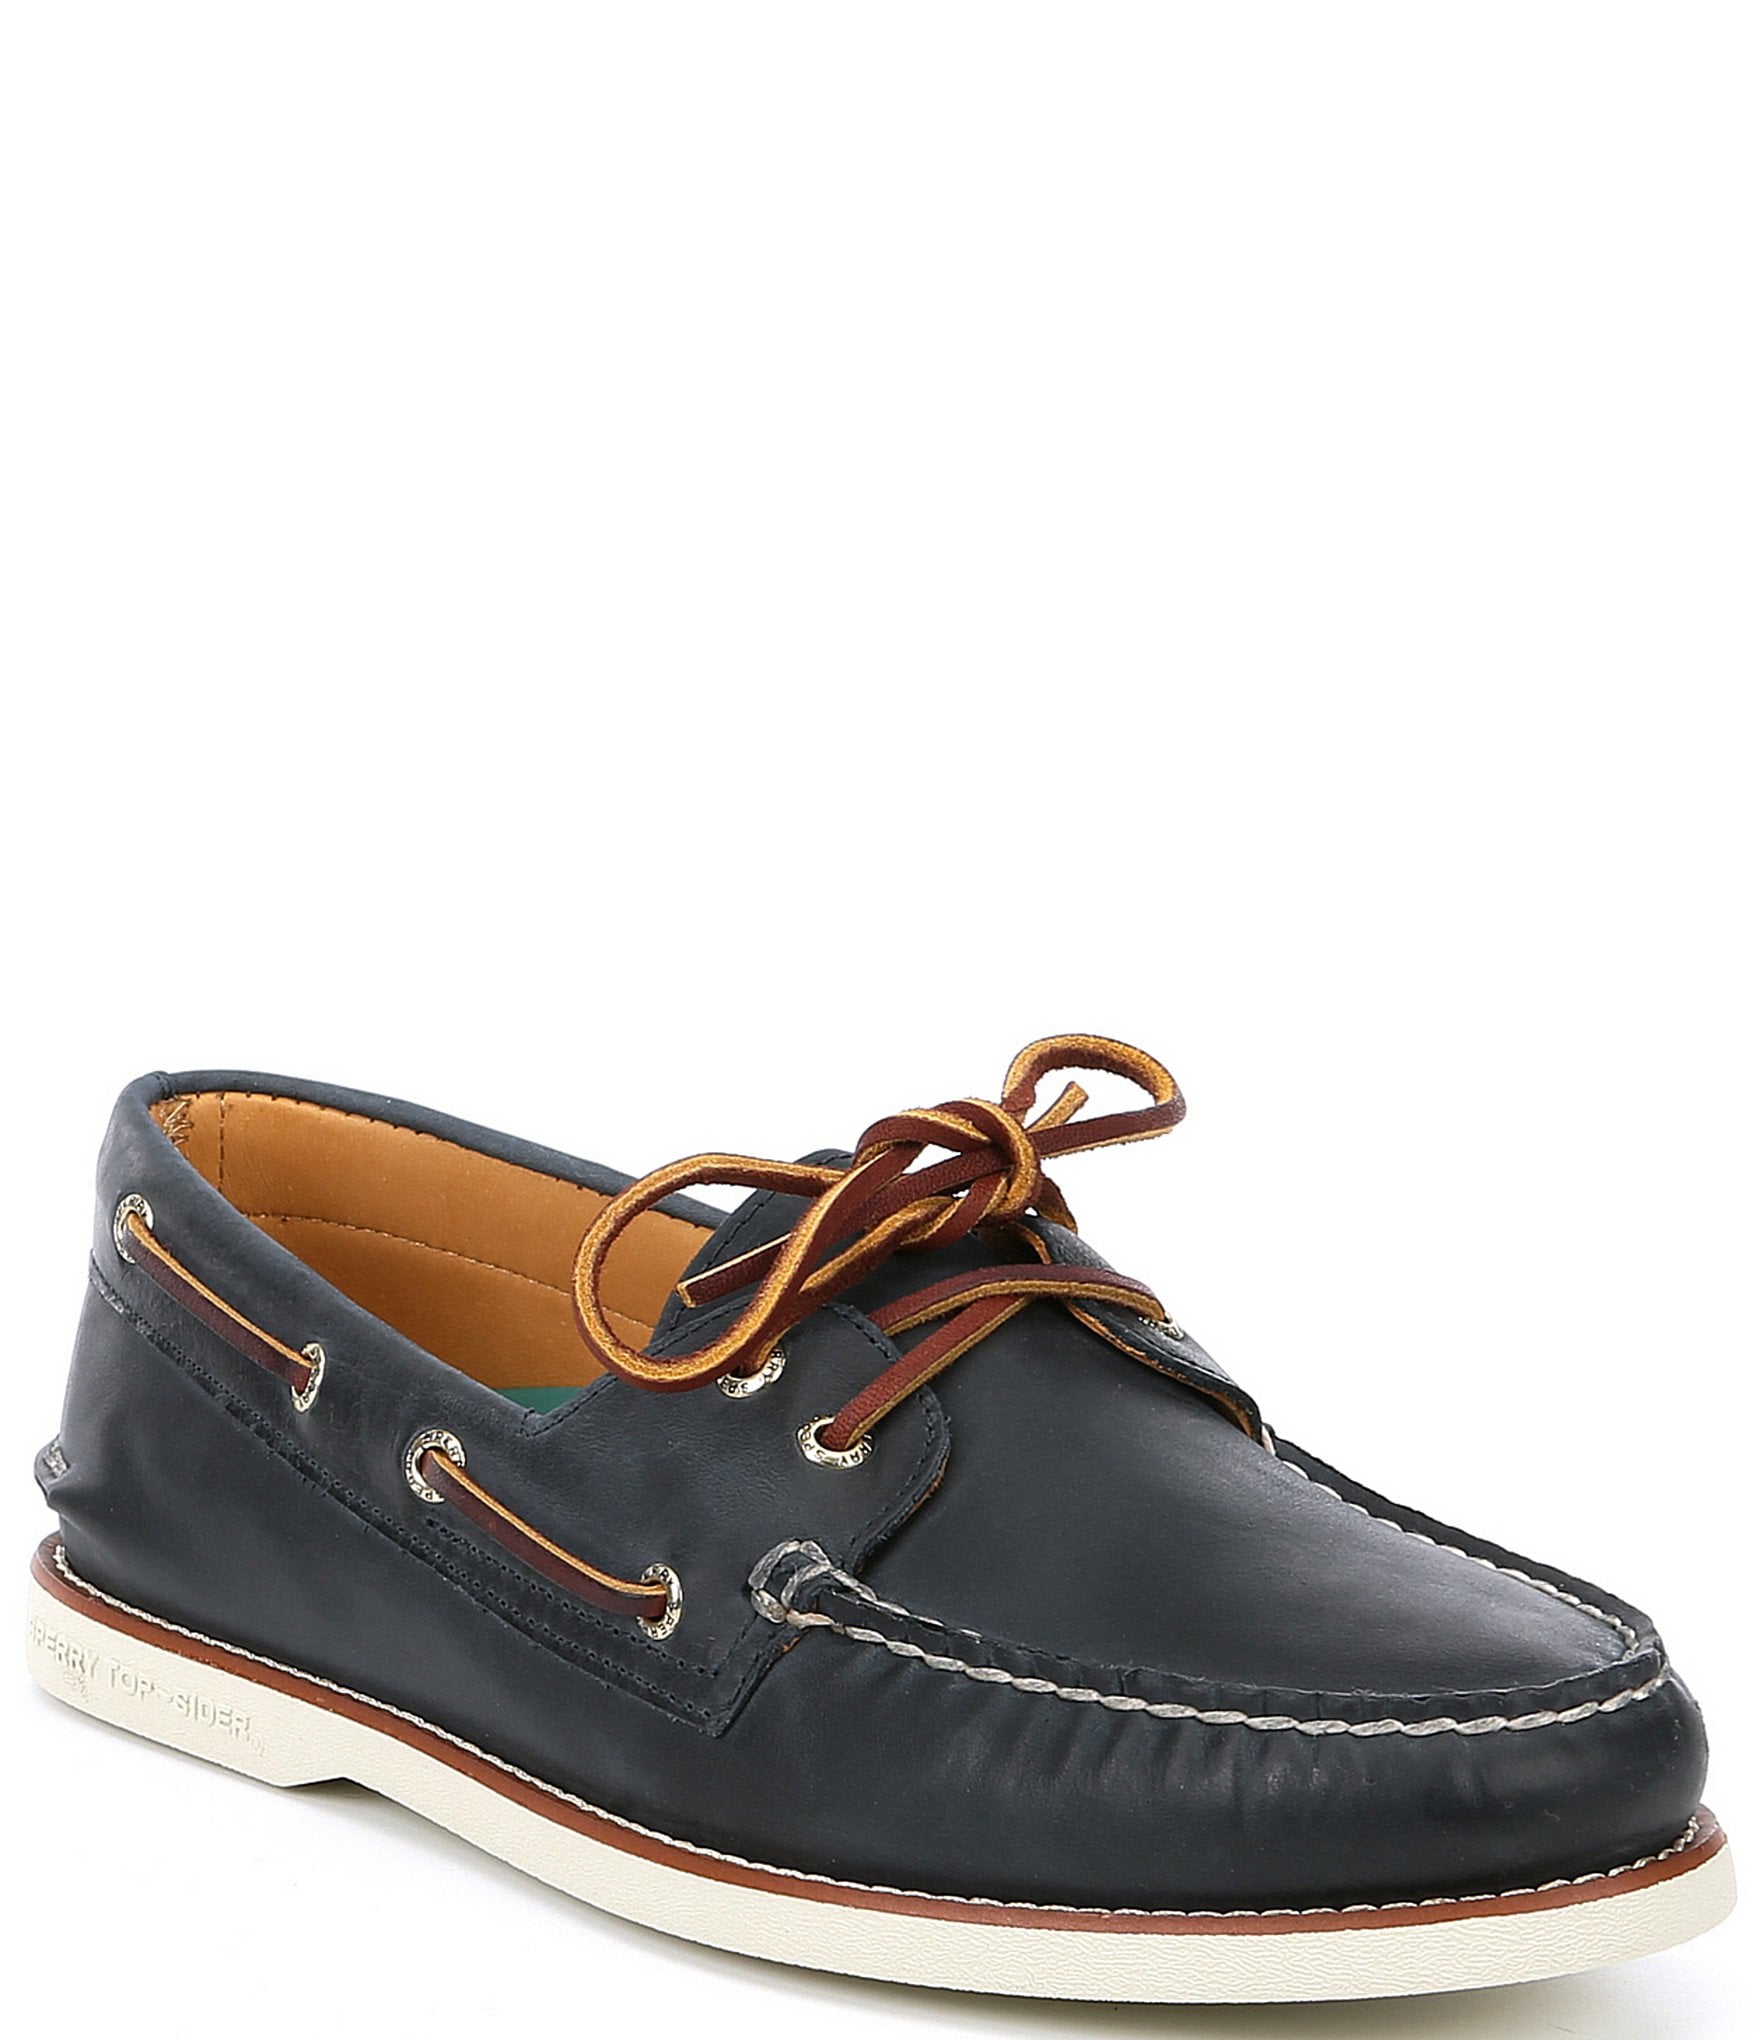 Sperry Men's Gold Leather and Suede Boat Shoes | Dillard's